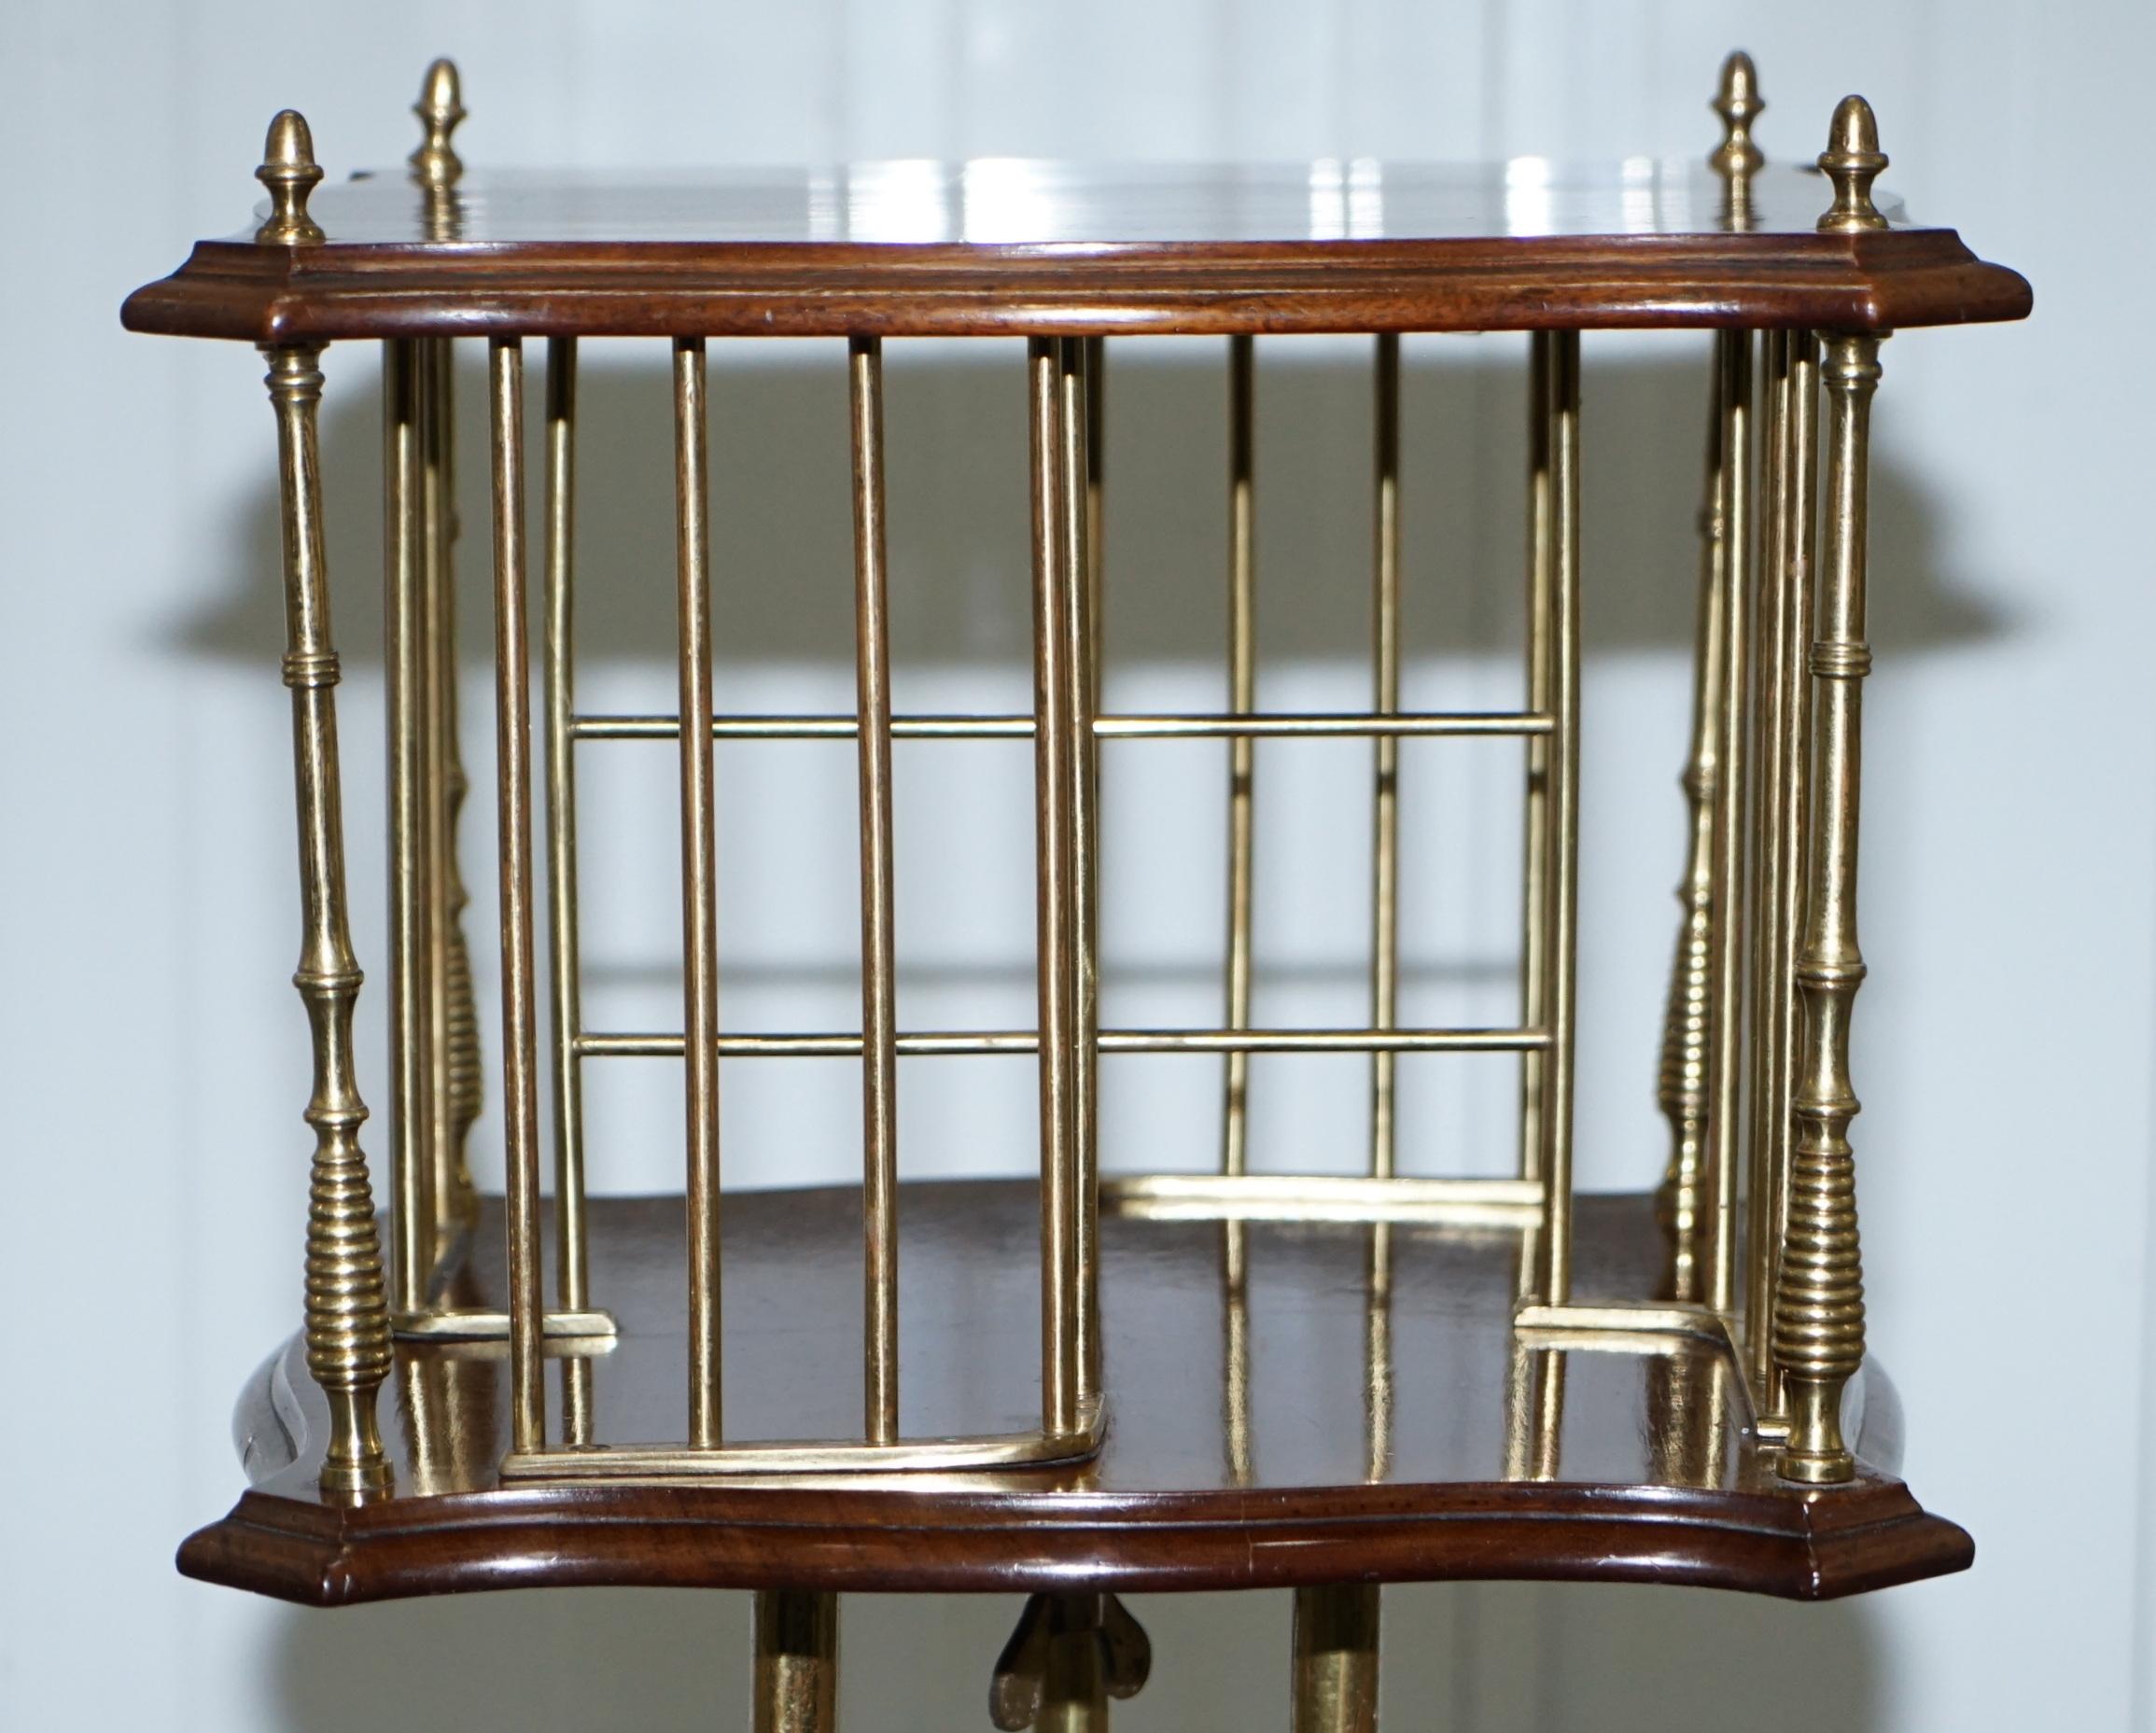 Ornate 19th Century Hardwood and Brass Revolving Bookcase in the Regency Style 2